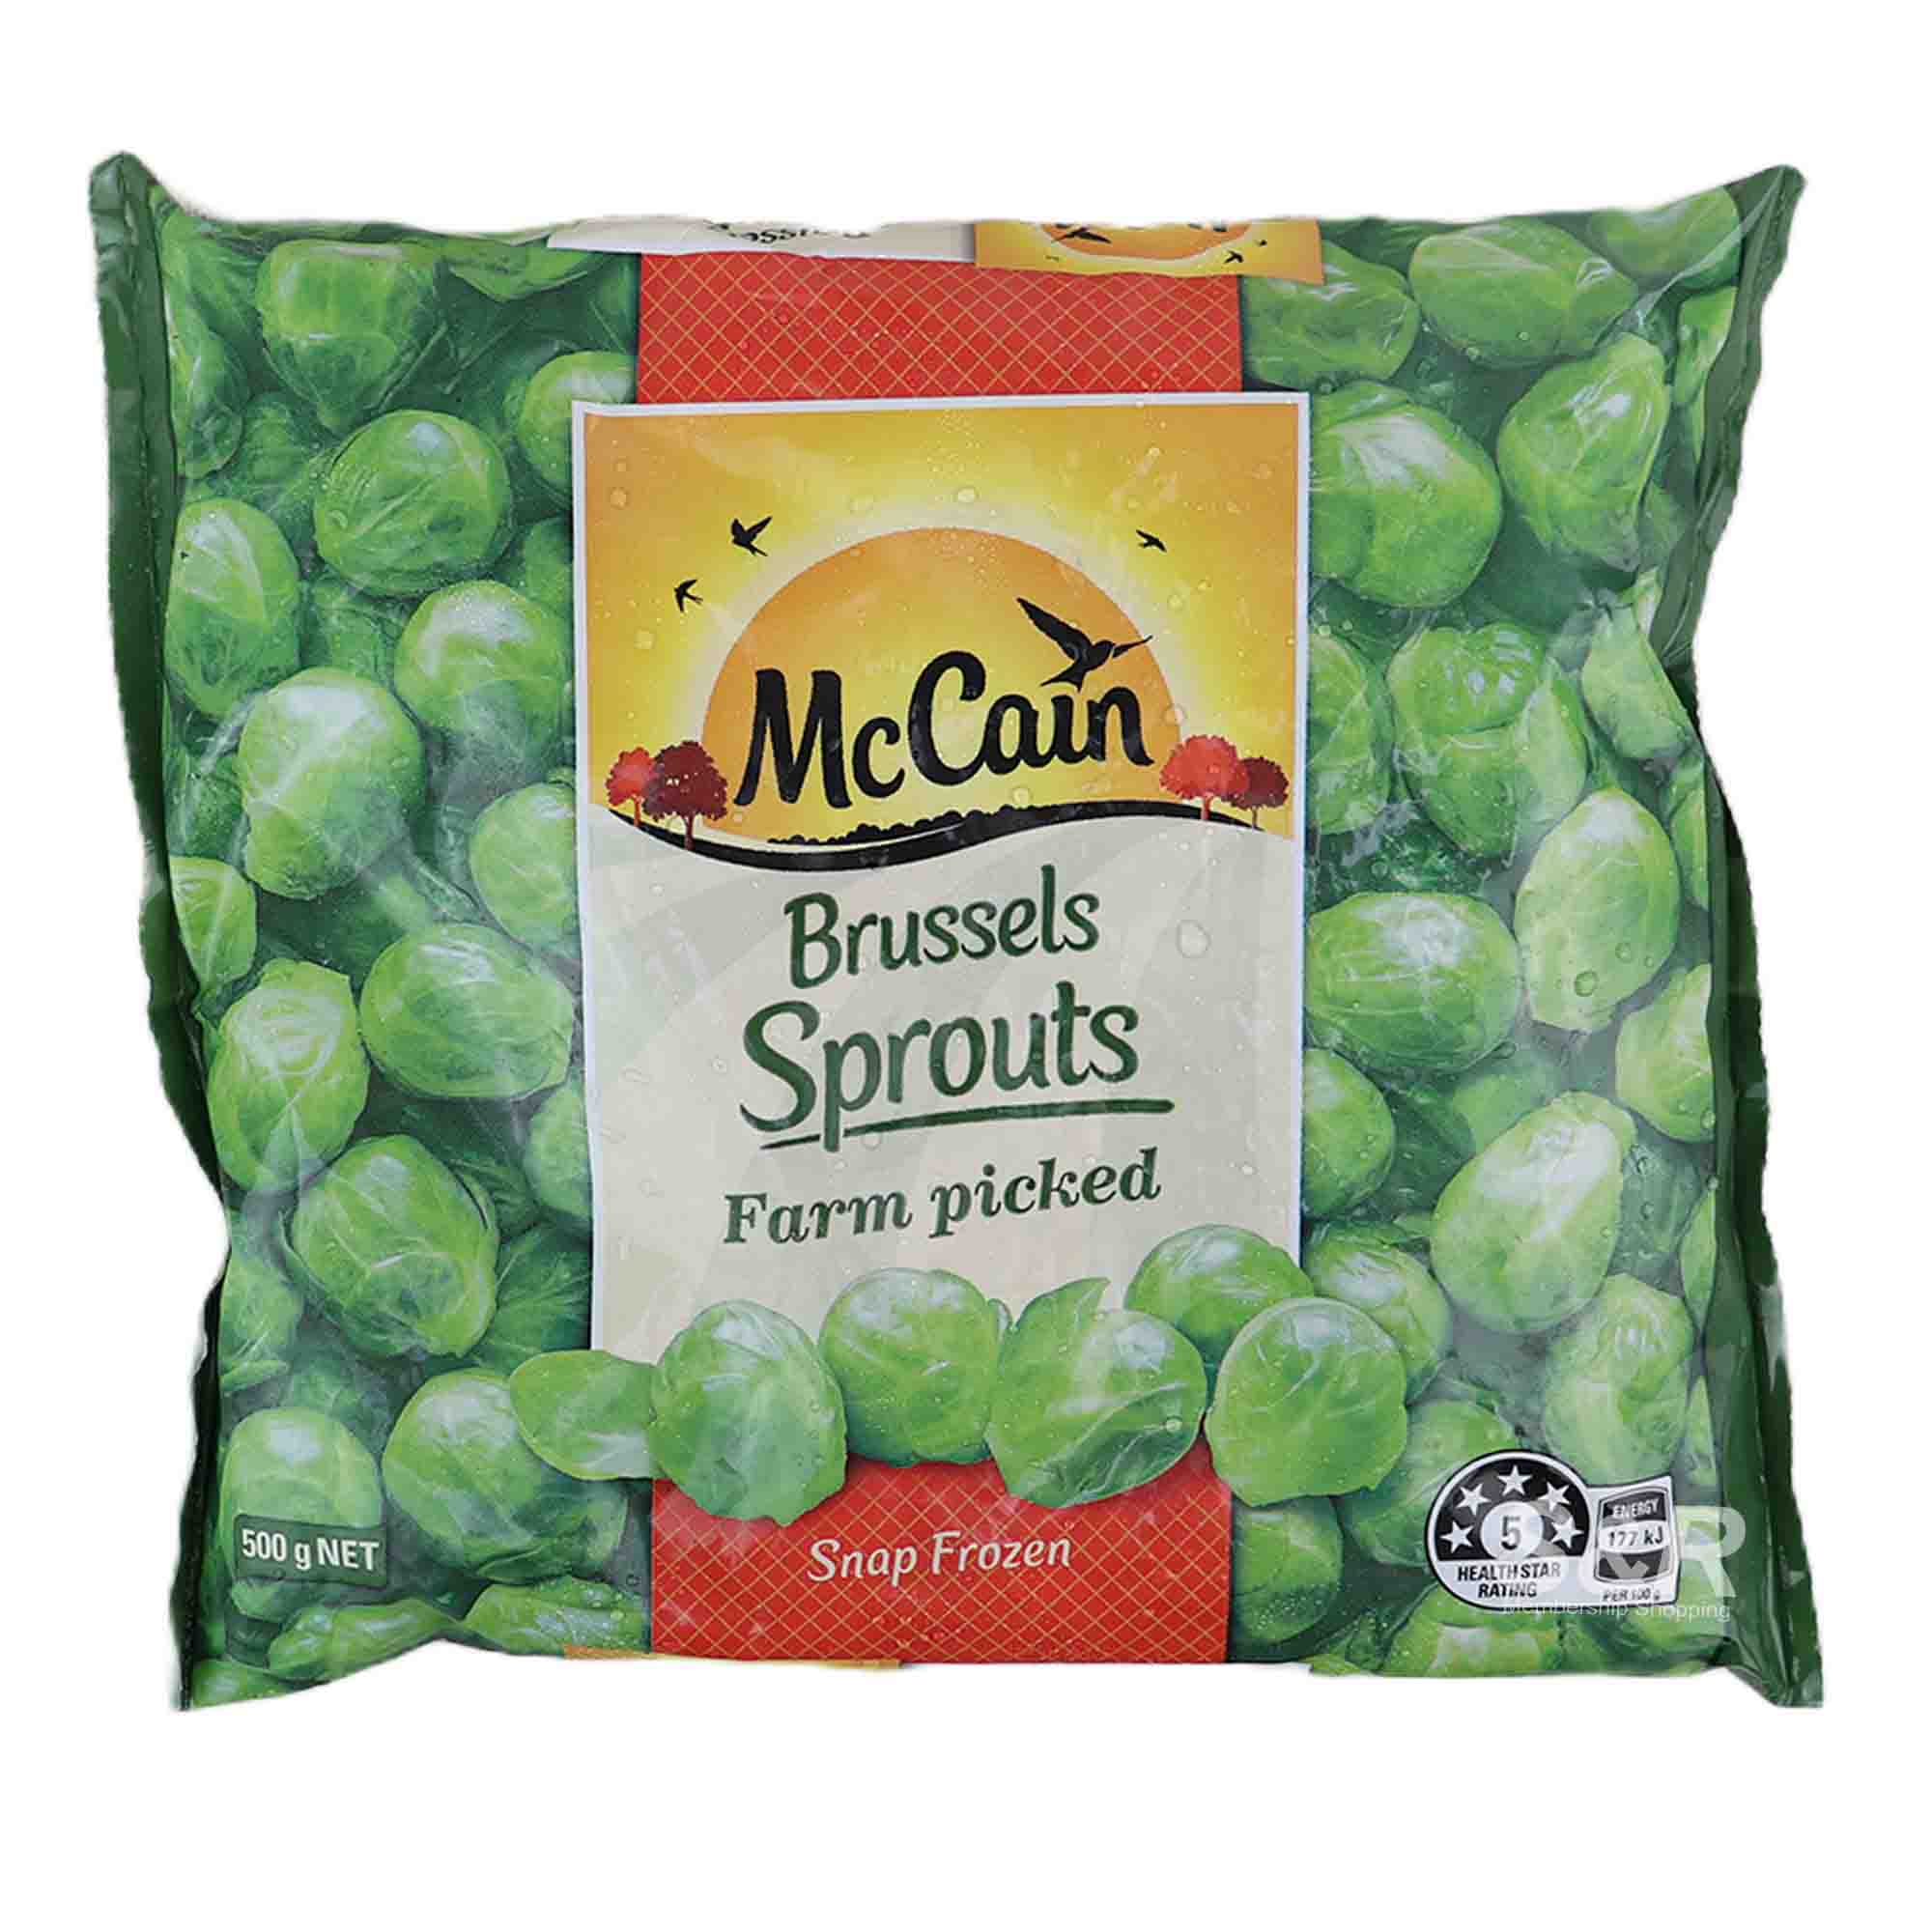 McCain Brussels Sprouts 500g